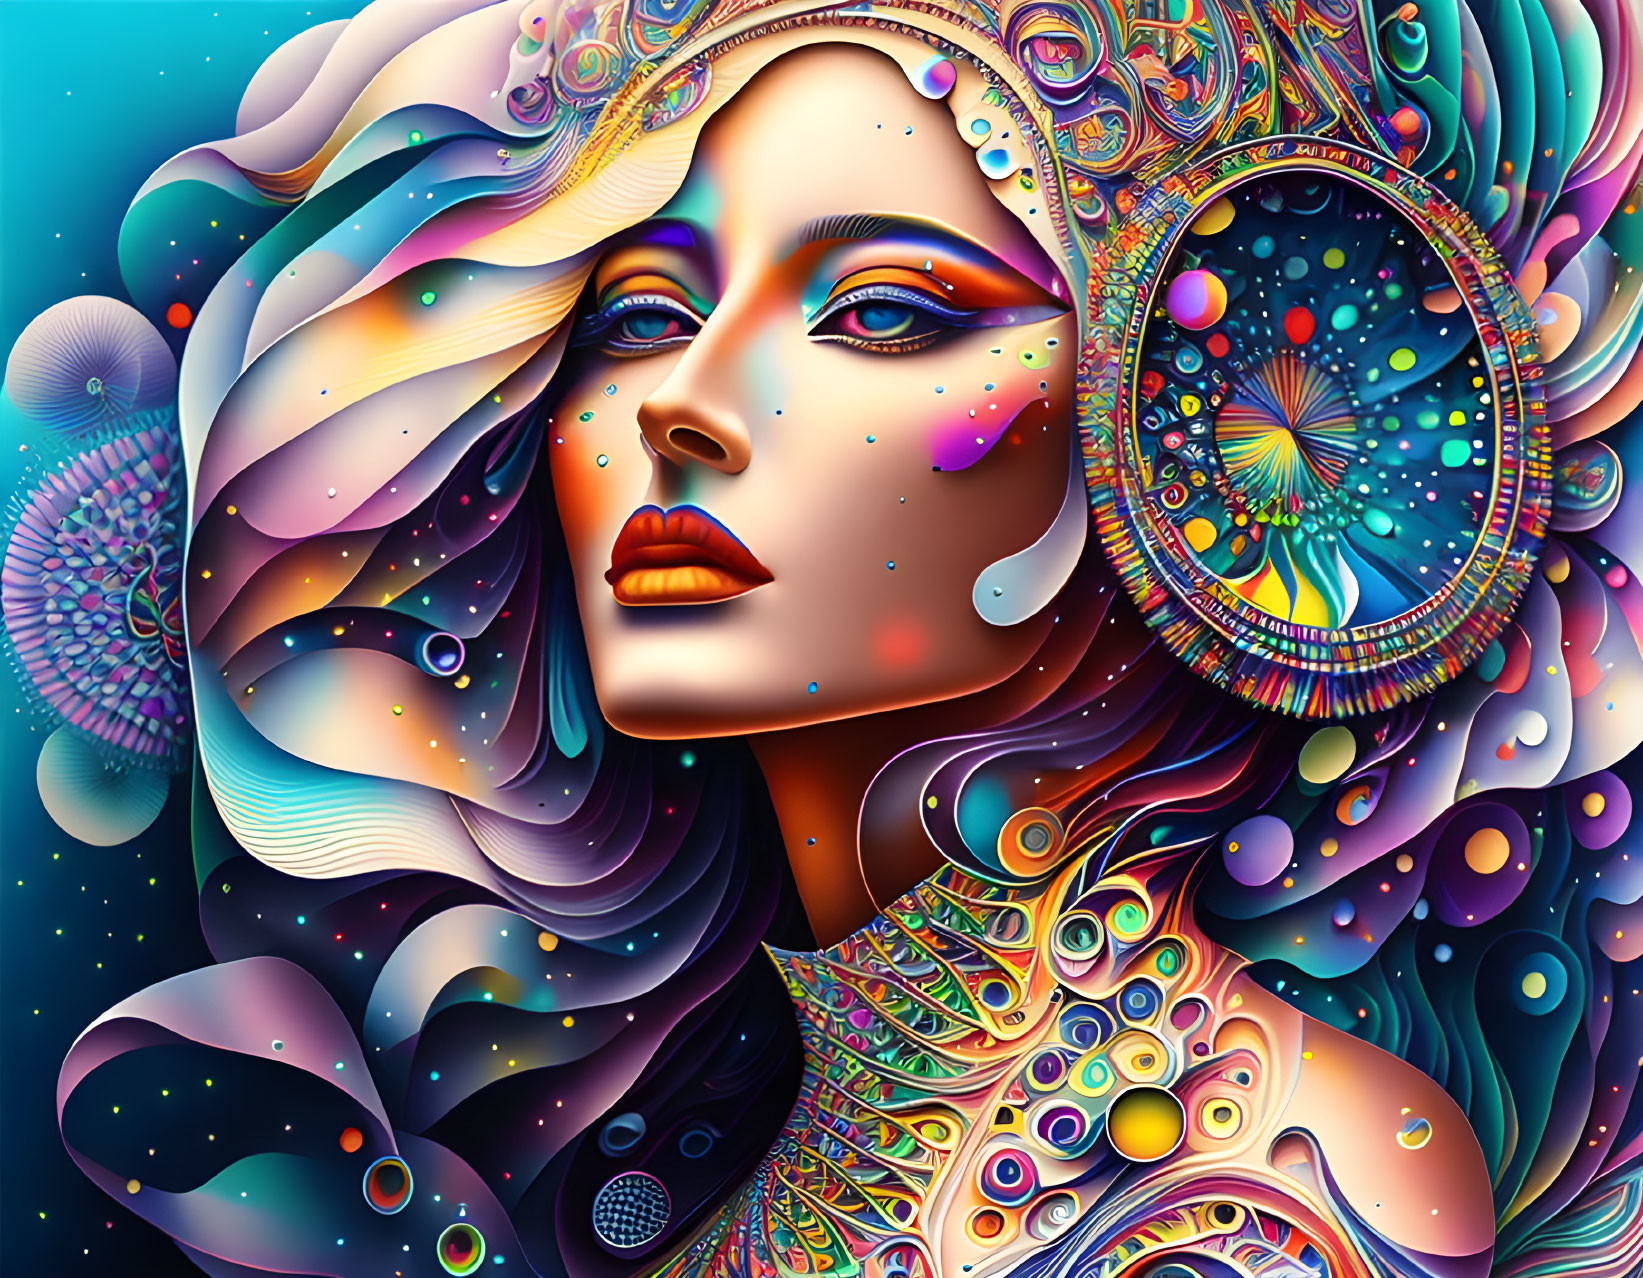 Colorful digital artwork featuring woman with intricate patterns and cosmic motifs